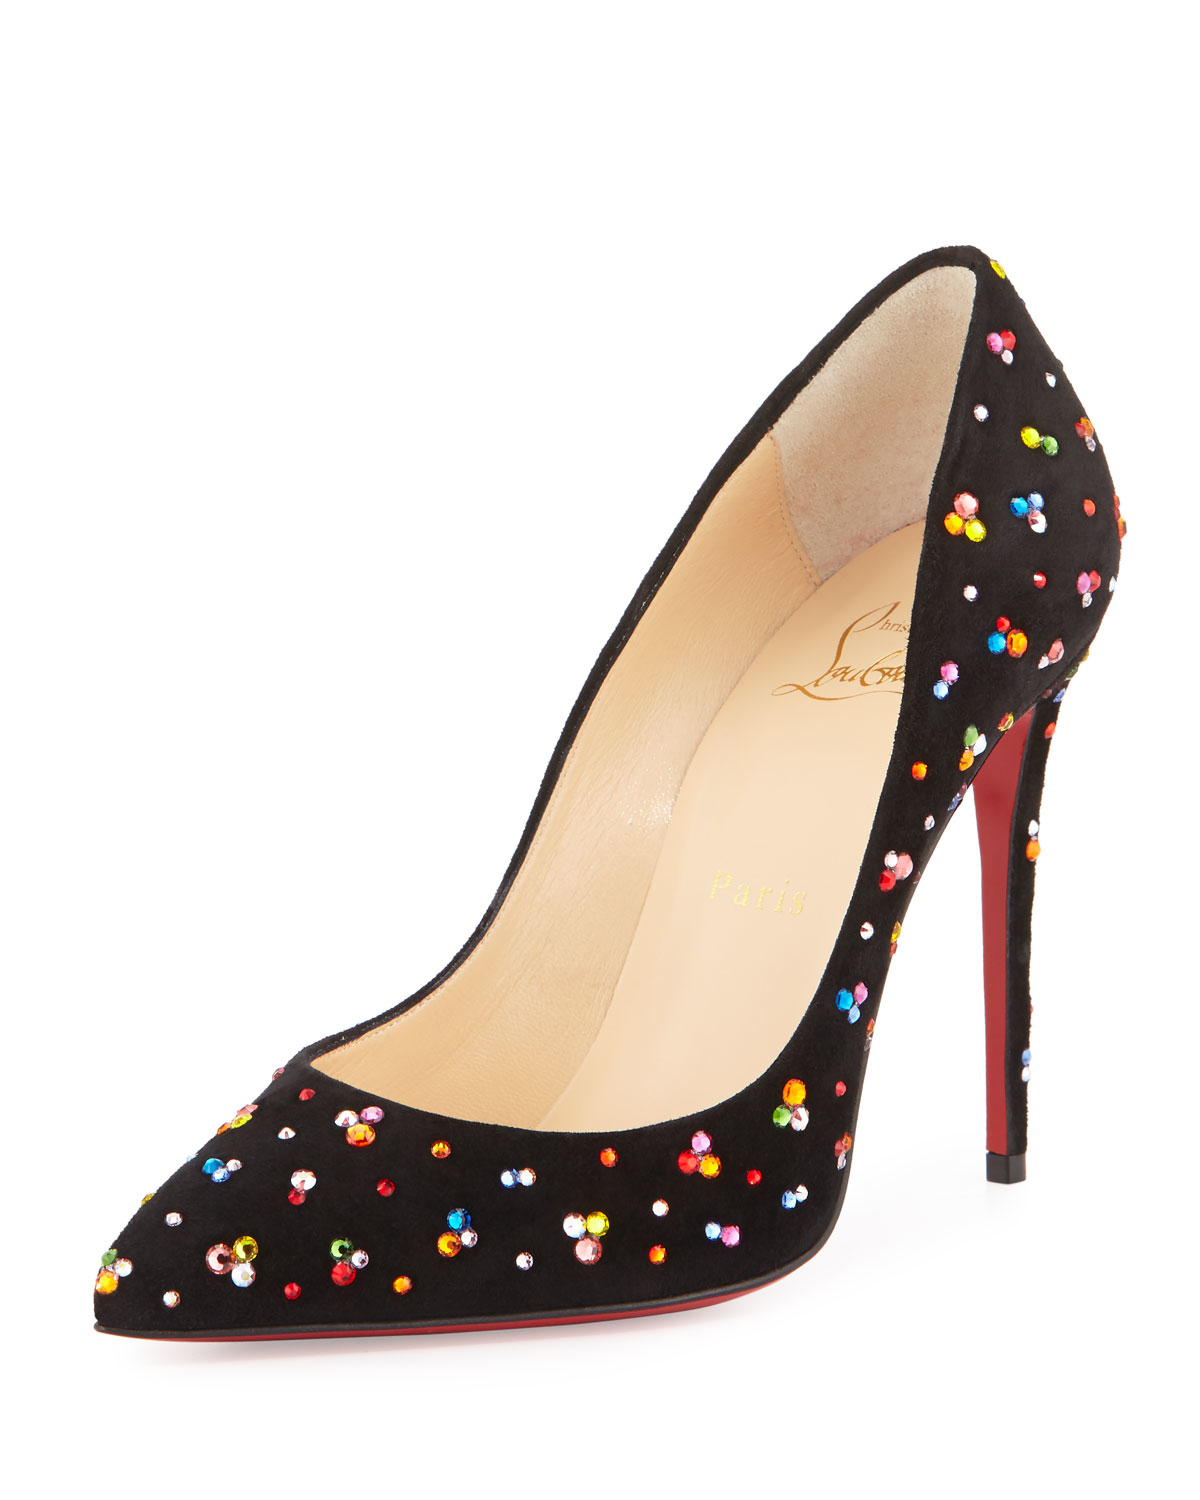 Christian Louboutin Pigalle Spikes 100mm Pumps Black